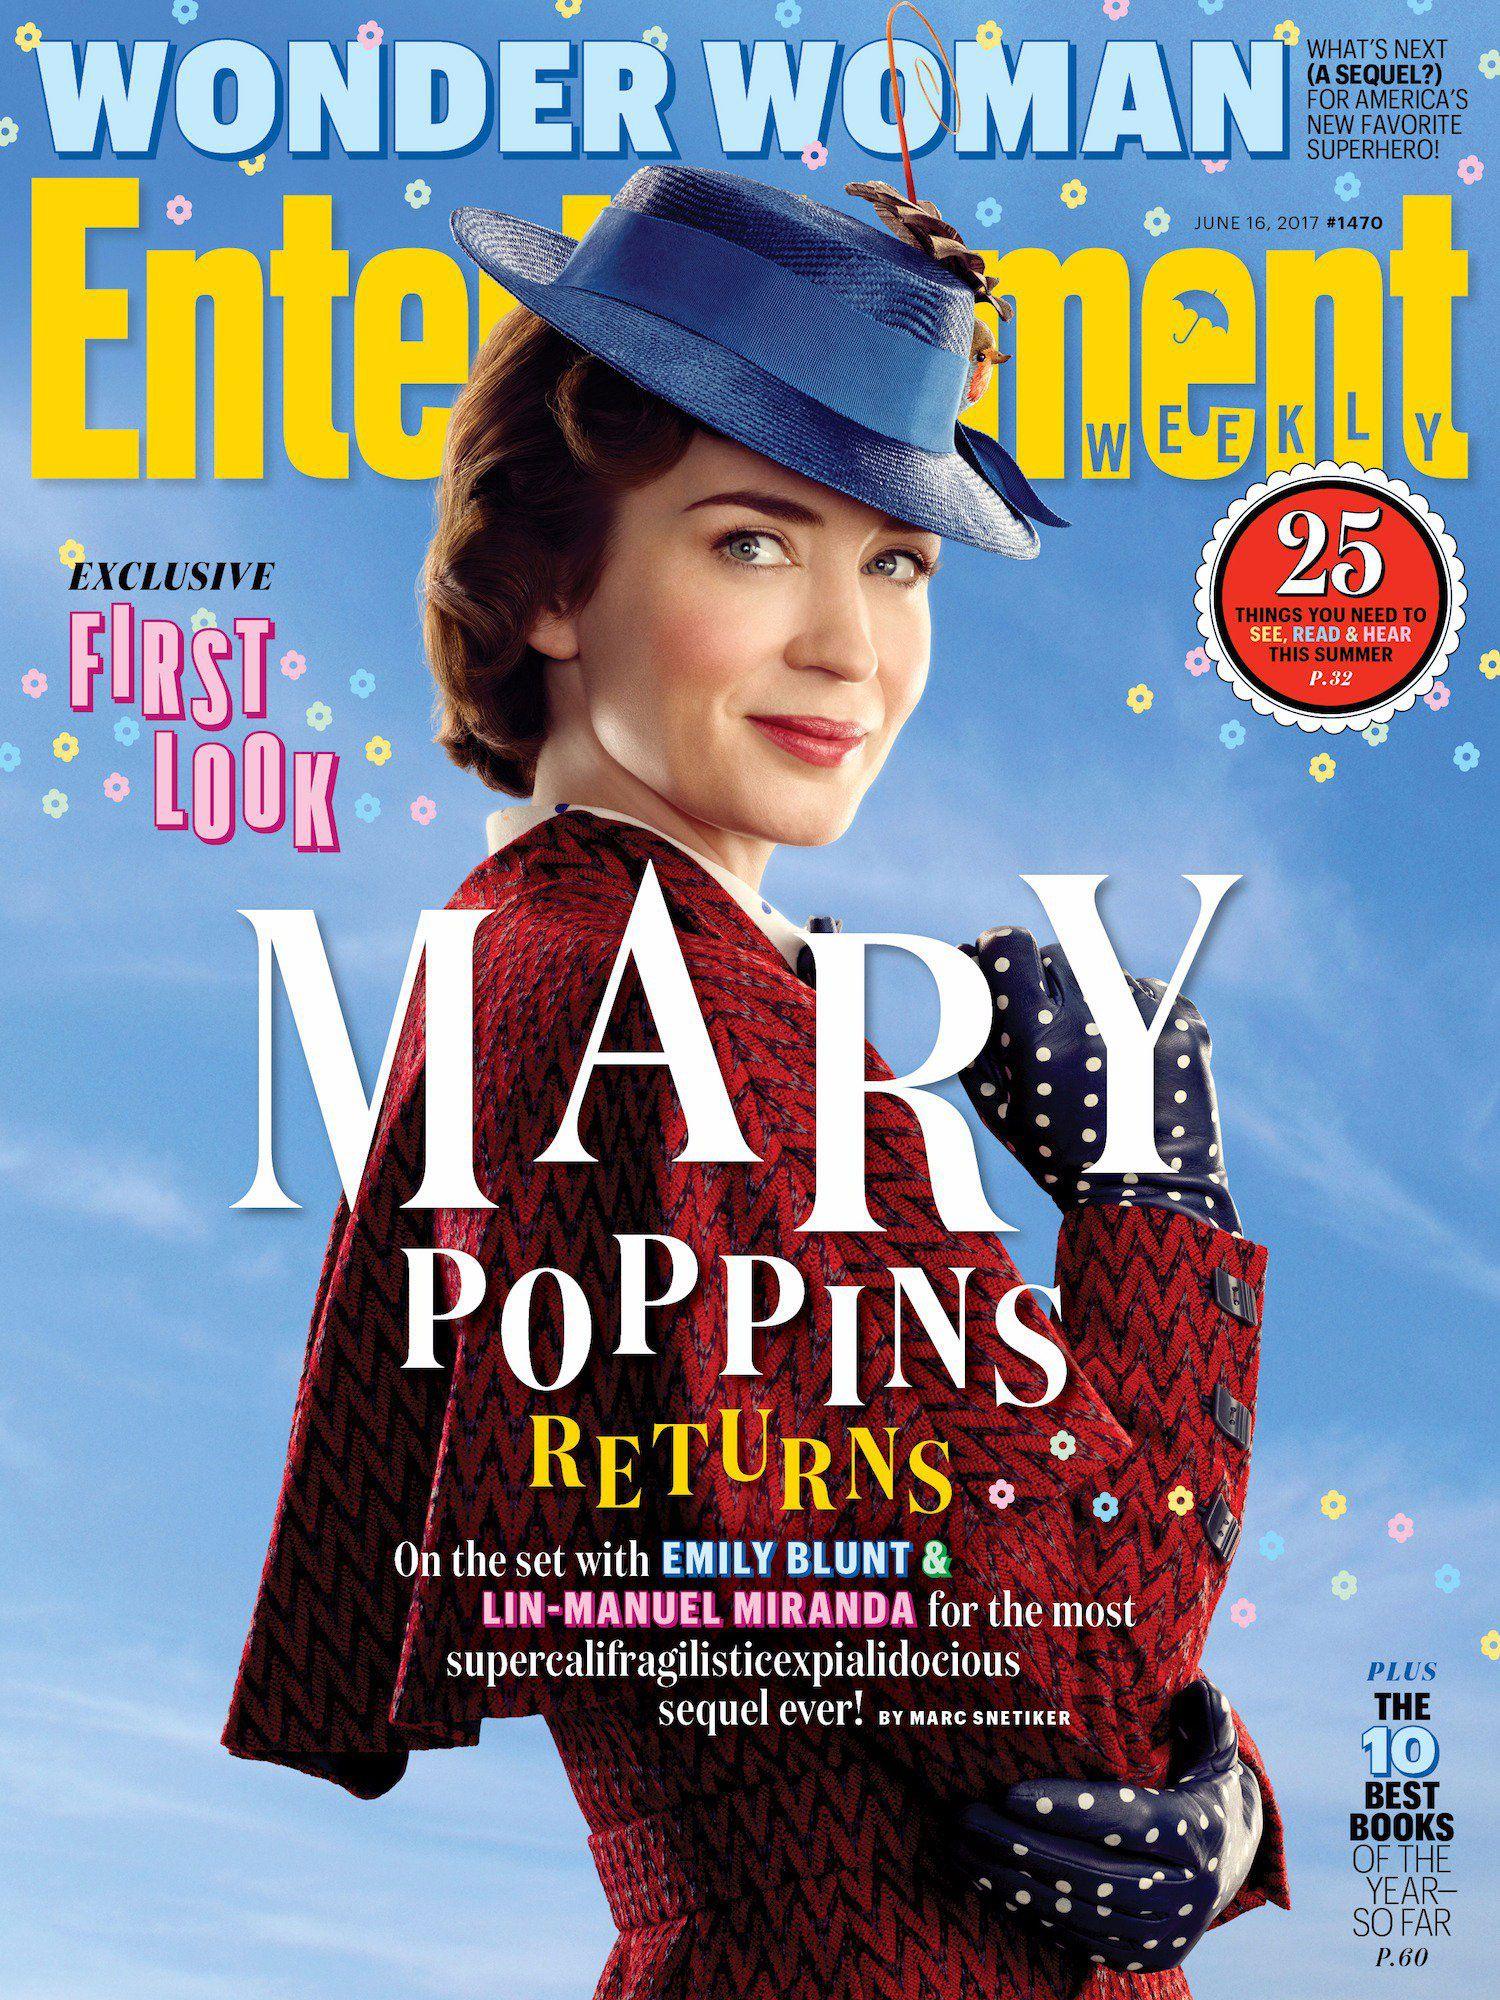 Get a full look at Emily Blunt as Mary Poppins, yall!